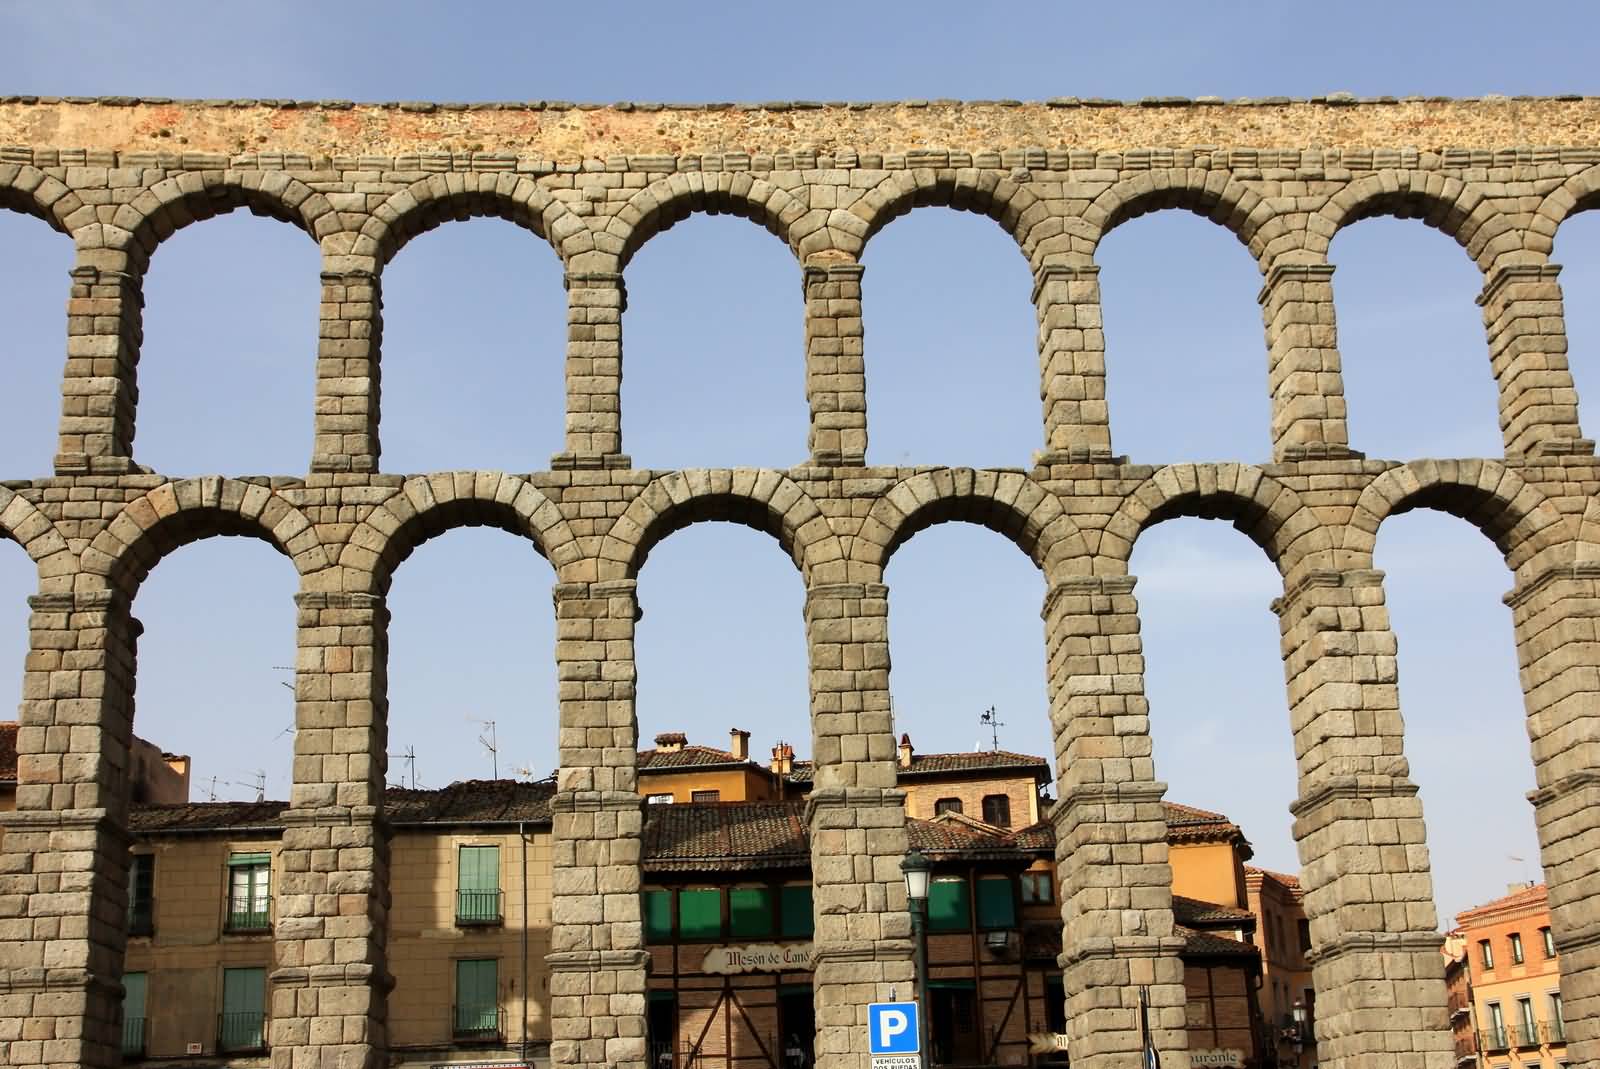 Front Image Of The Aqueduct Of Segovia